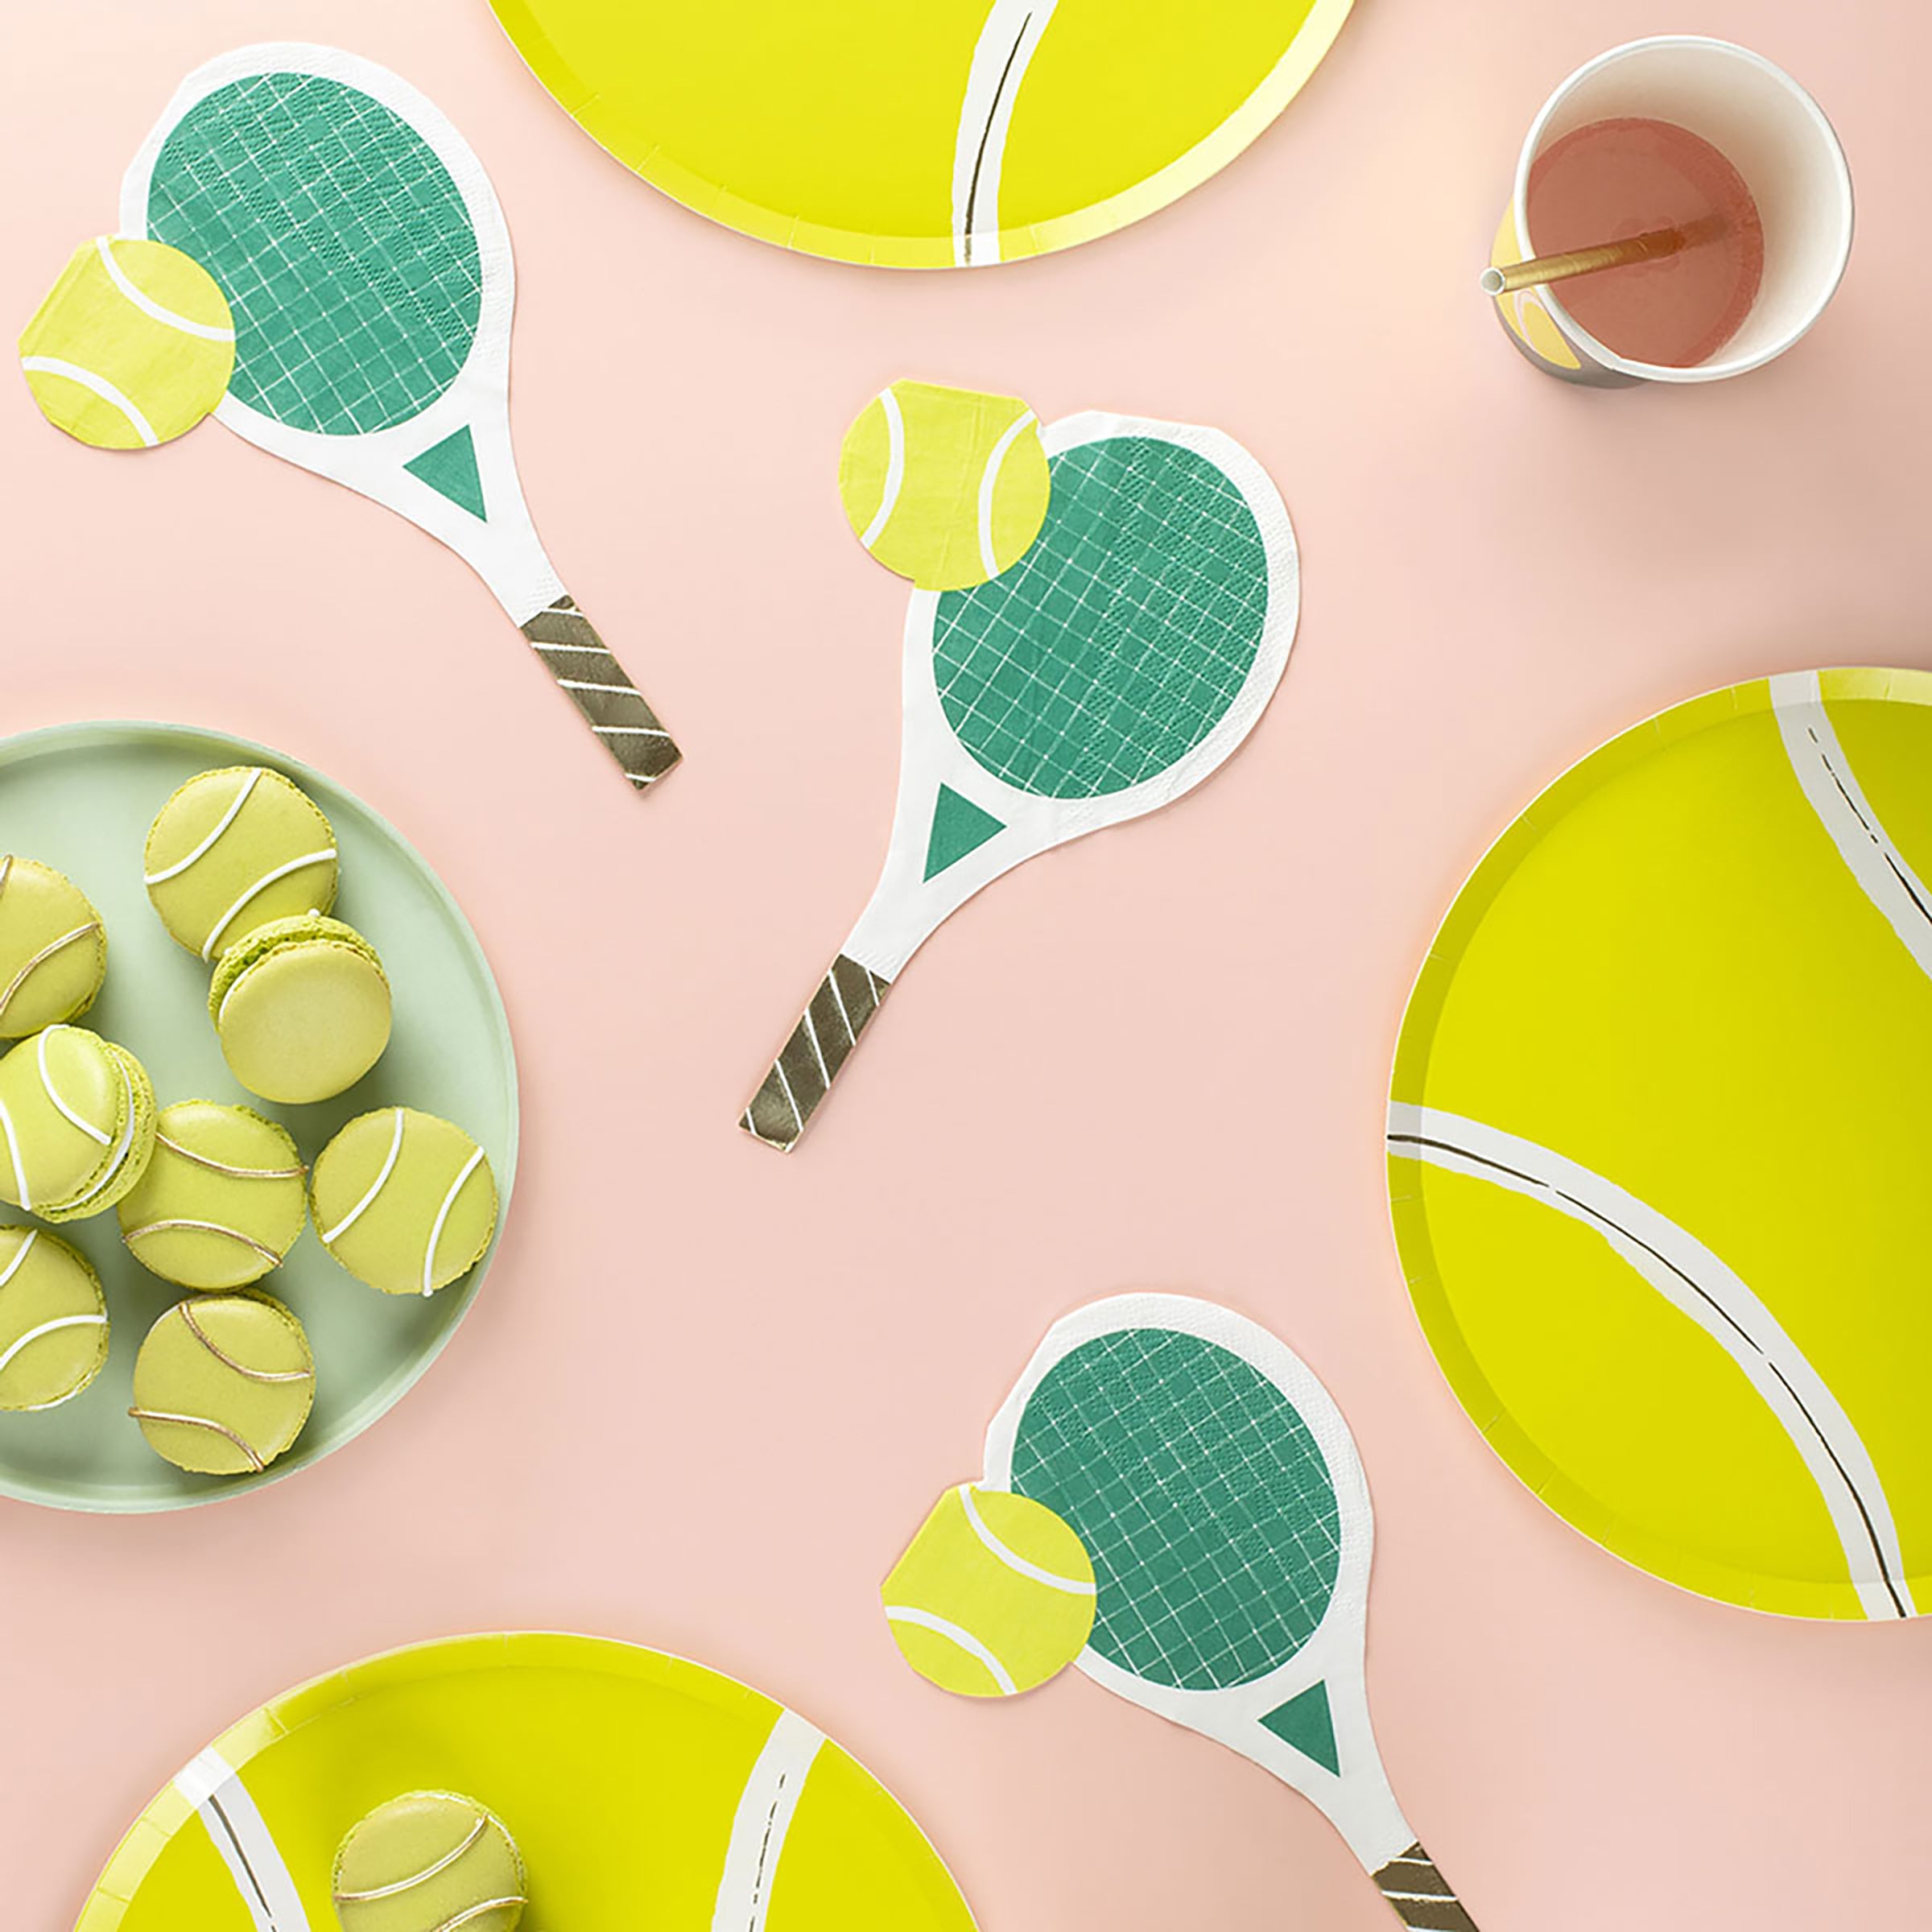 These party plates, in the shape of tennis balls, are ideal for a tennis party.